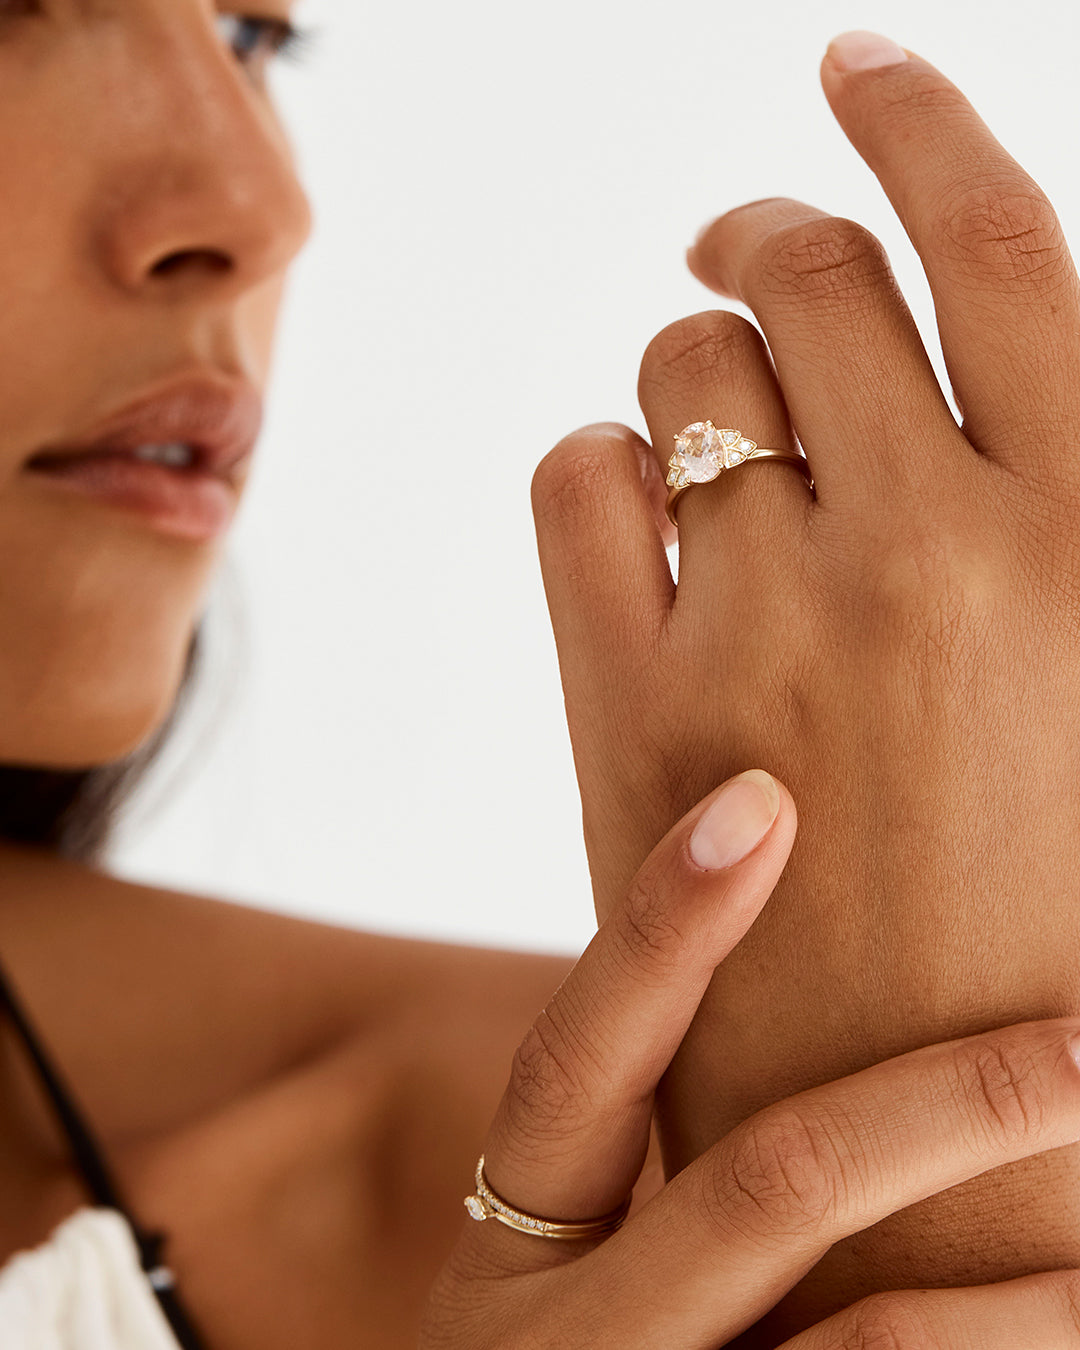 A model wears our oval morganite engagement ring, adorned with white diamonds either side